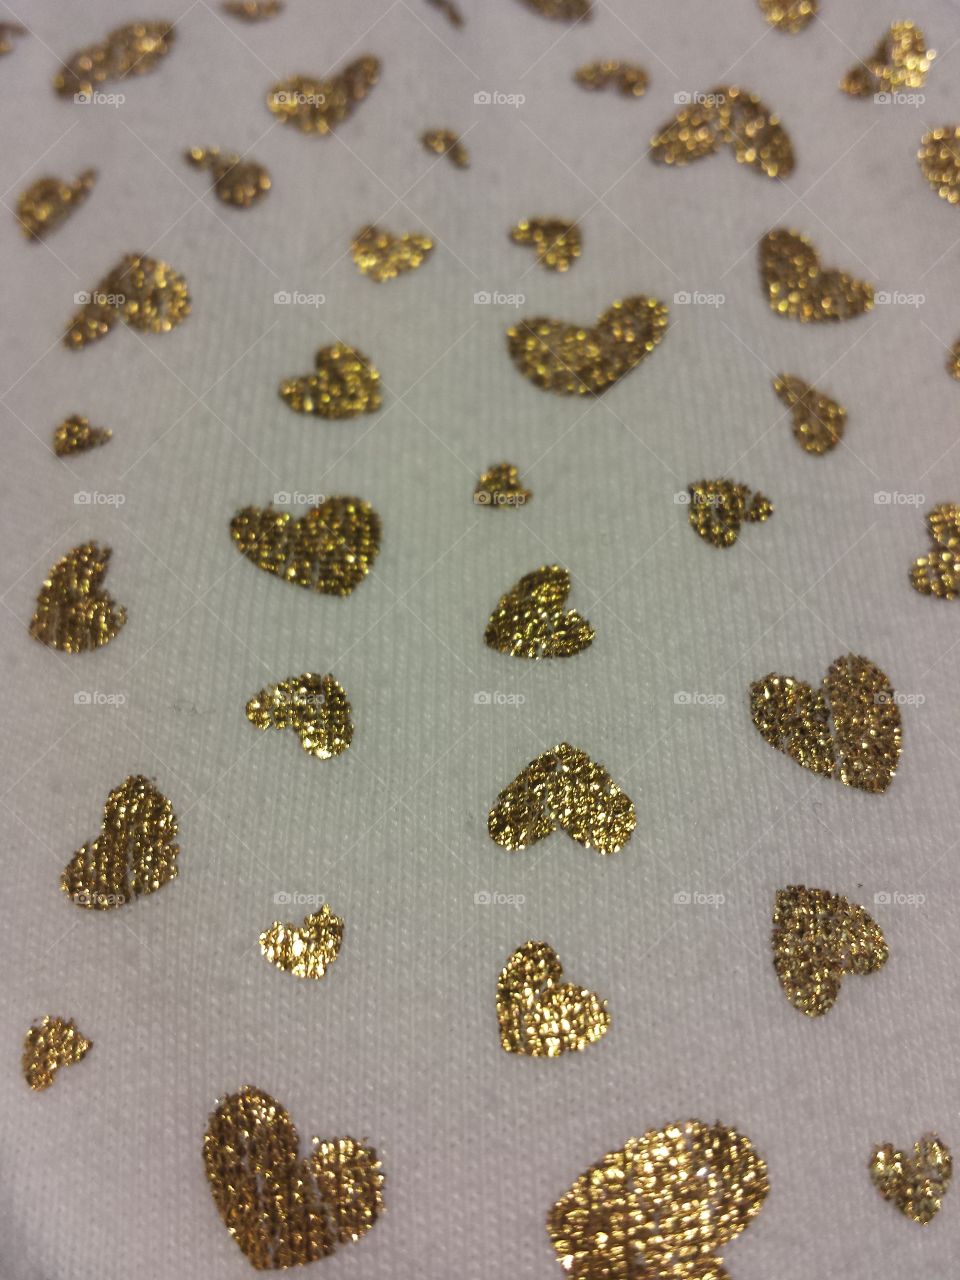 Gold Hearts on White Fabric